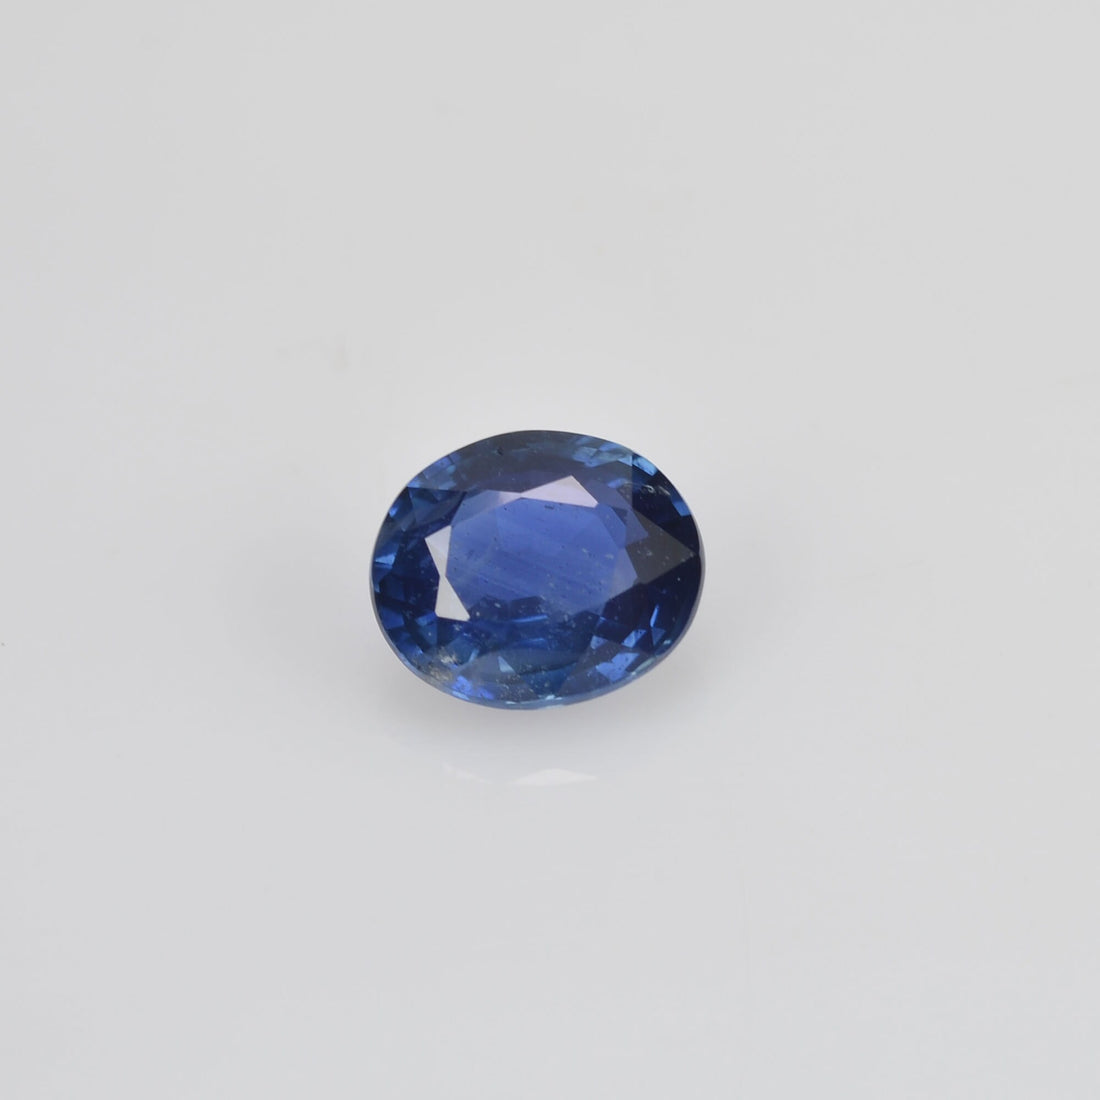 1.03 cts Natural Blue Sapphire Loose Gemstone Oval Cut